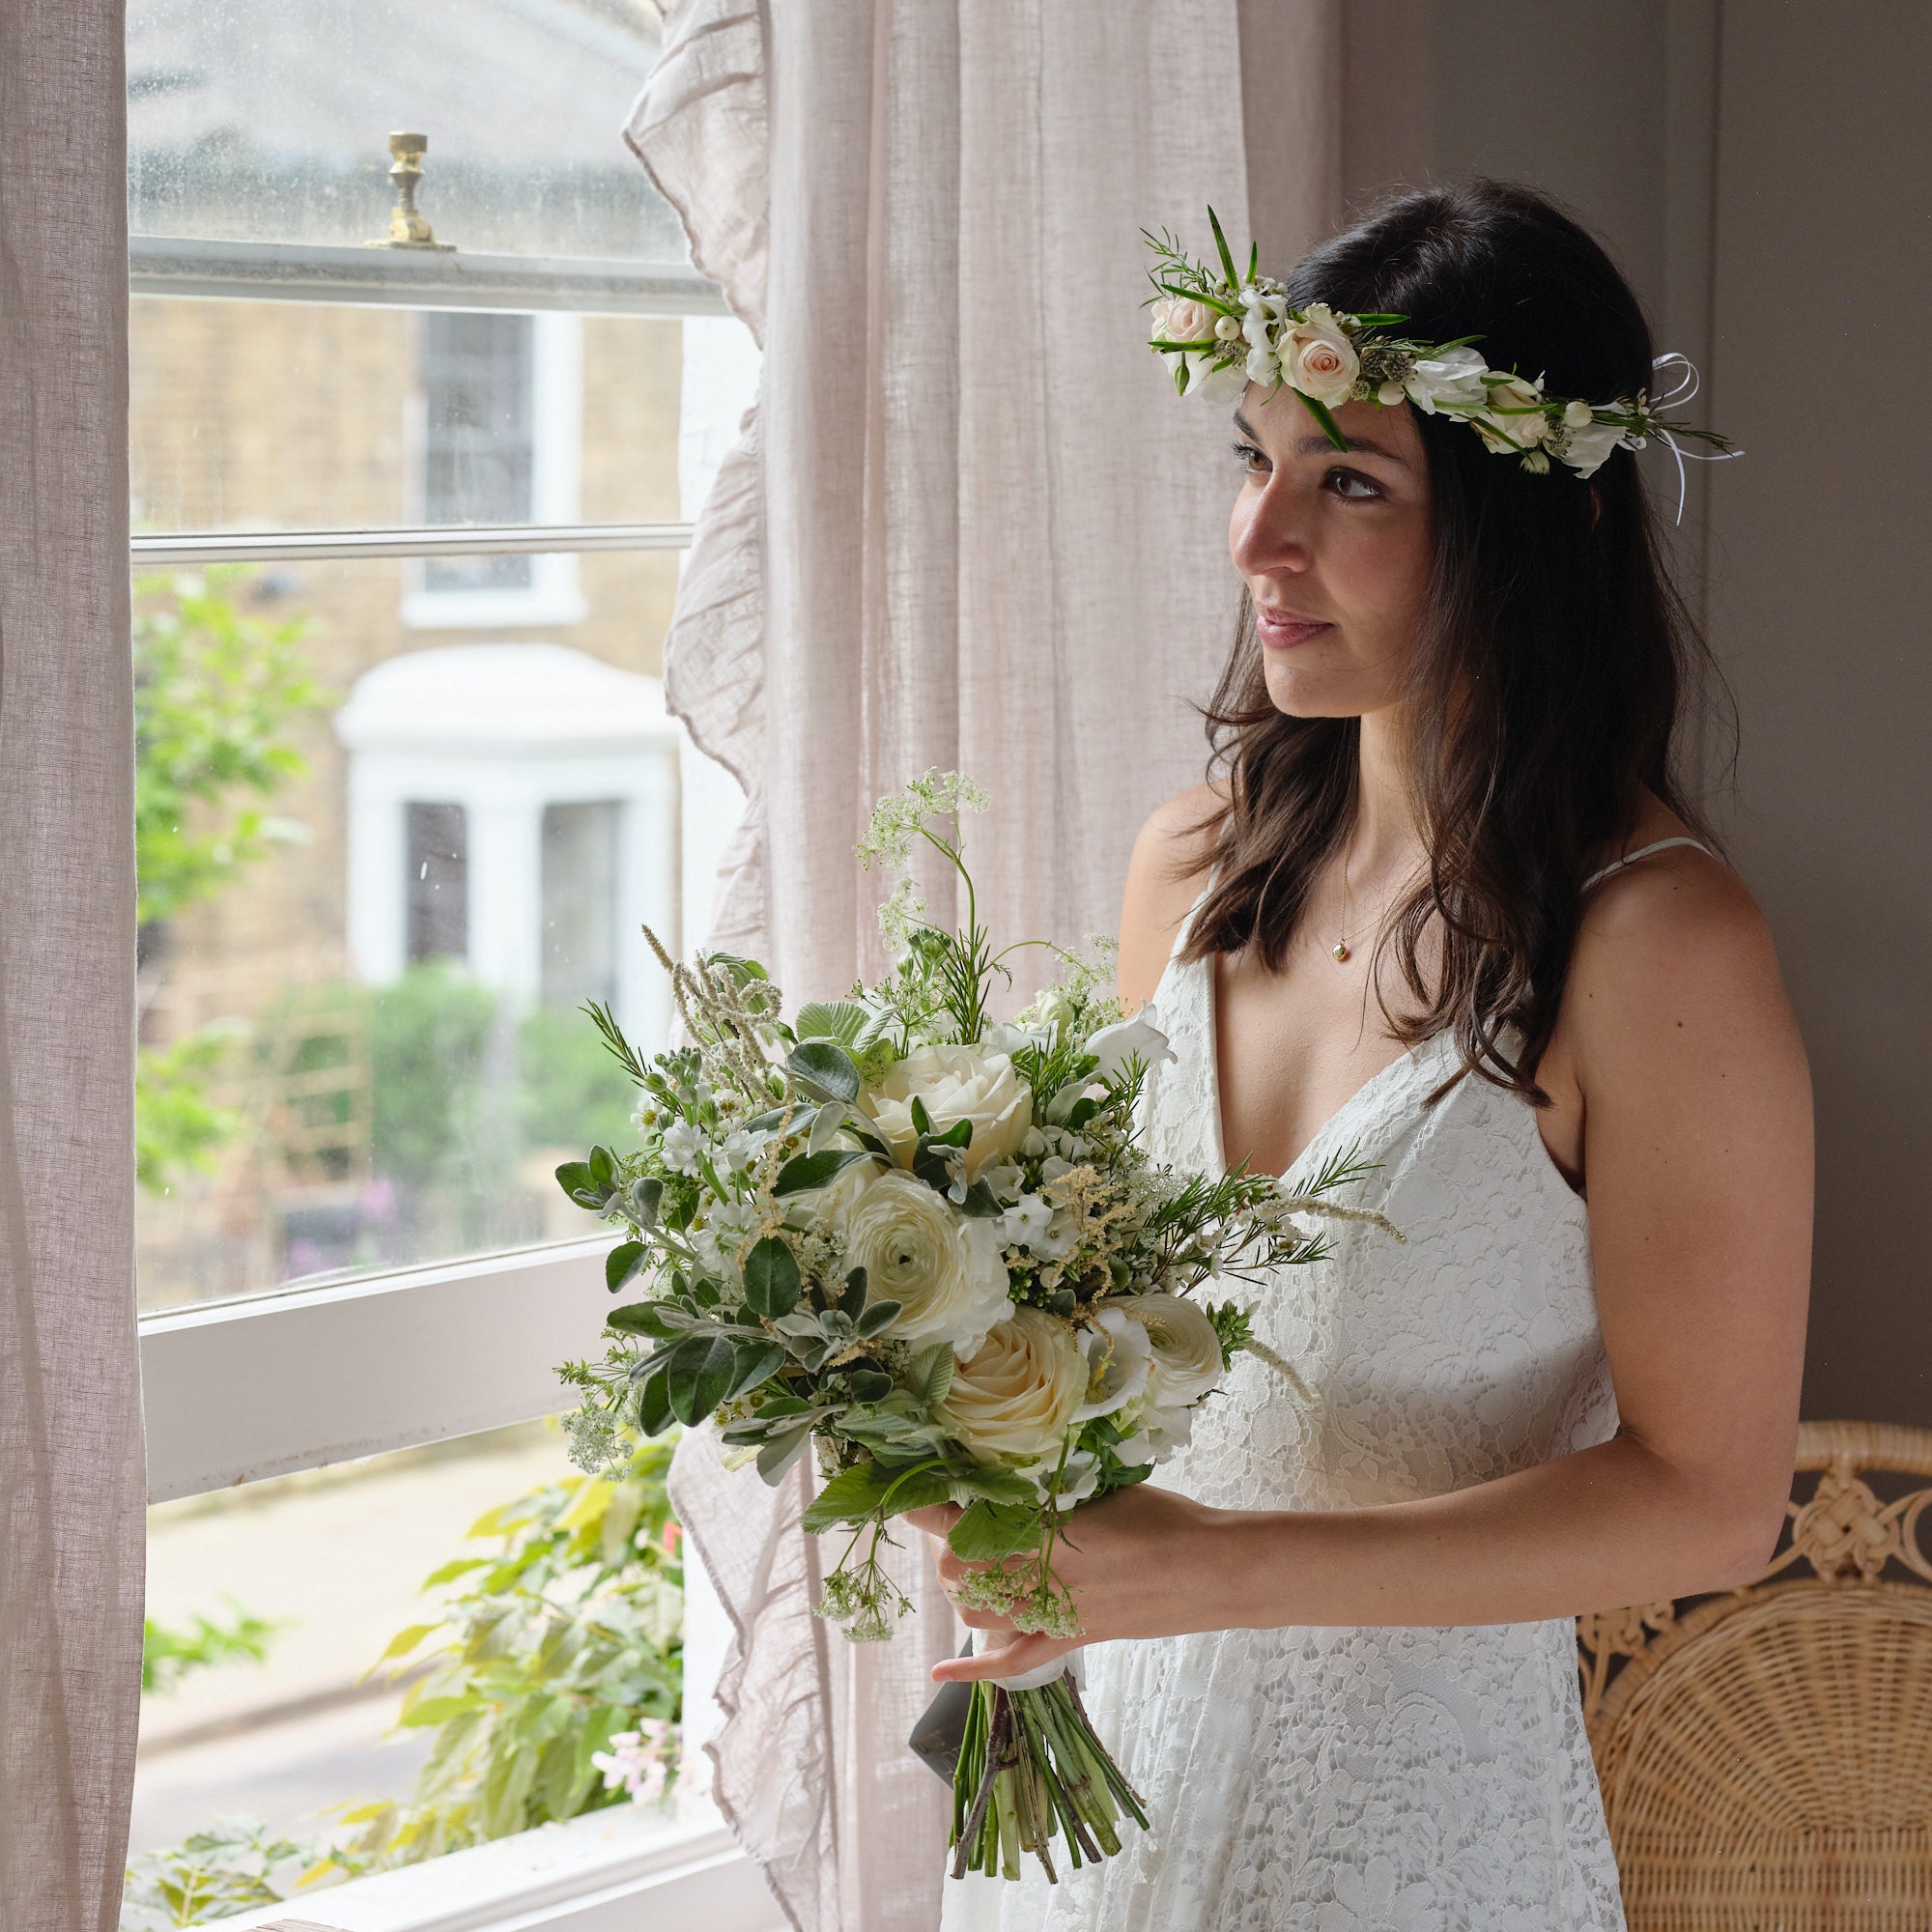 classic white bridal bouquet with white roses and fresh foliage by Botanique Workhshop London